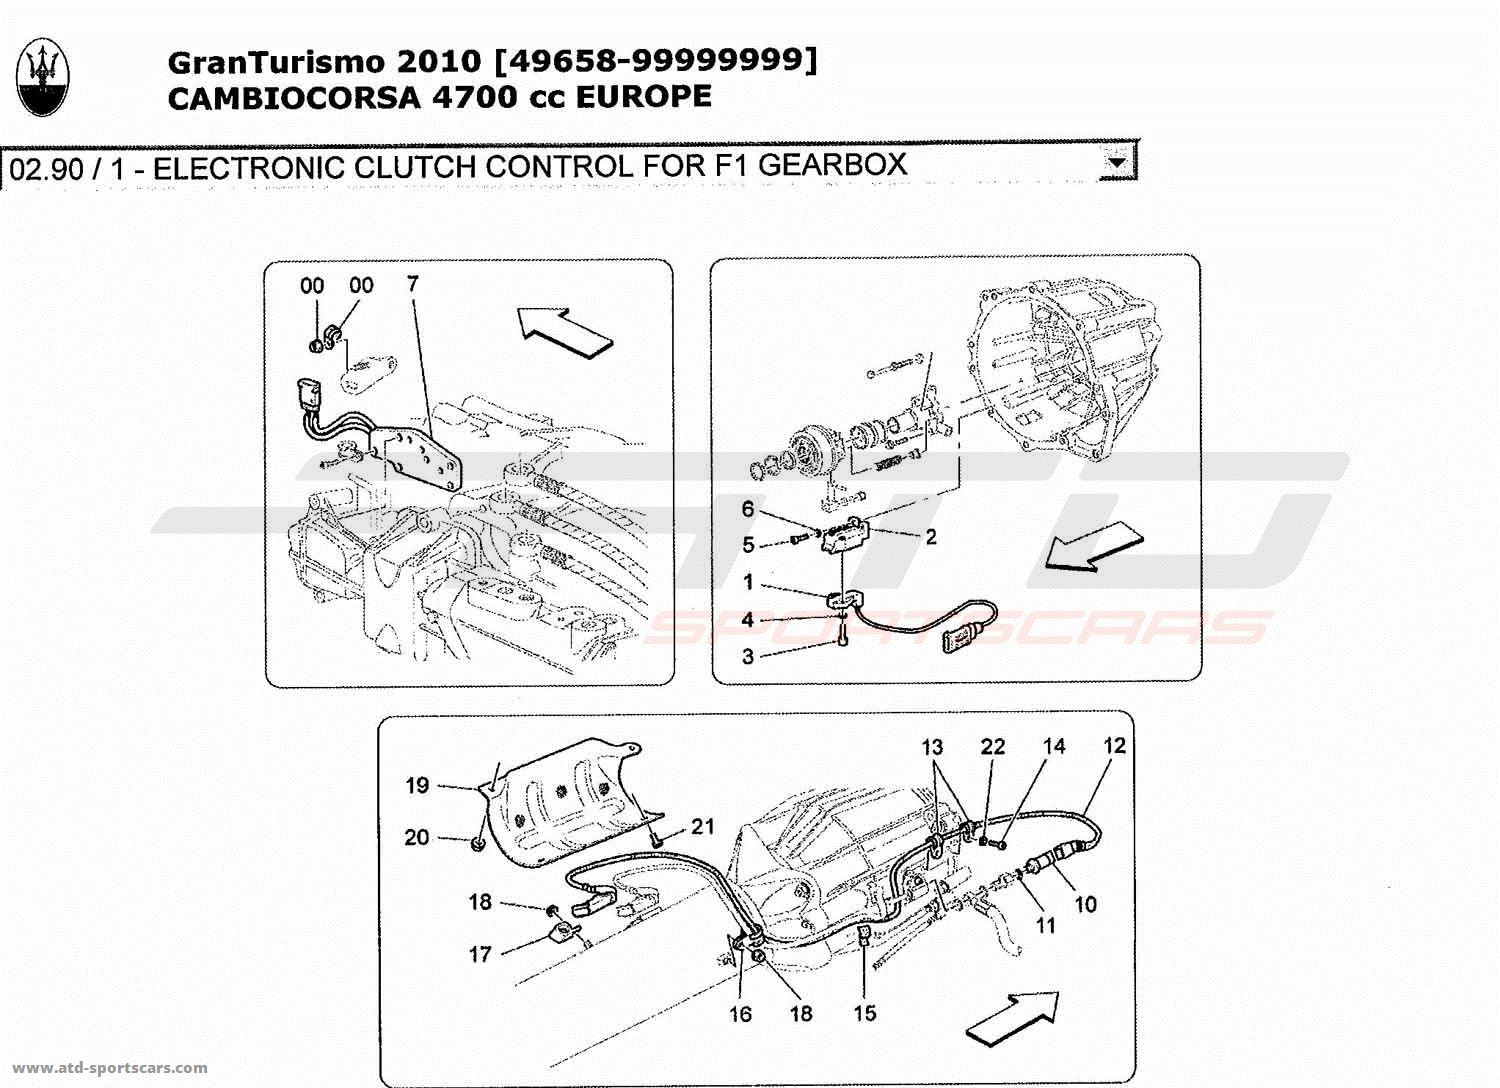 ELECTRONIC CLUTCH CONTROL FOR F1 GEARBOX